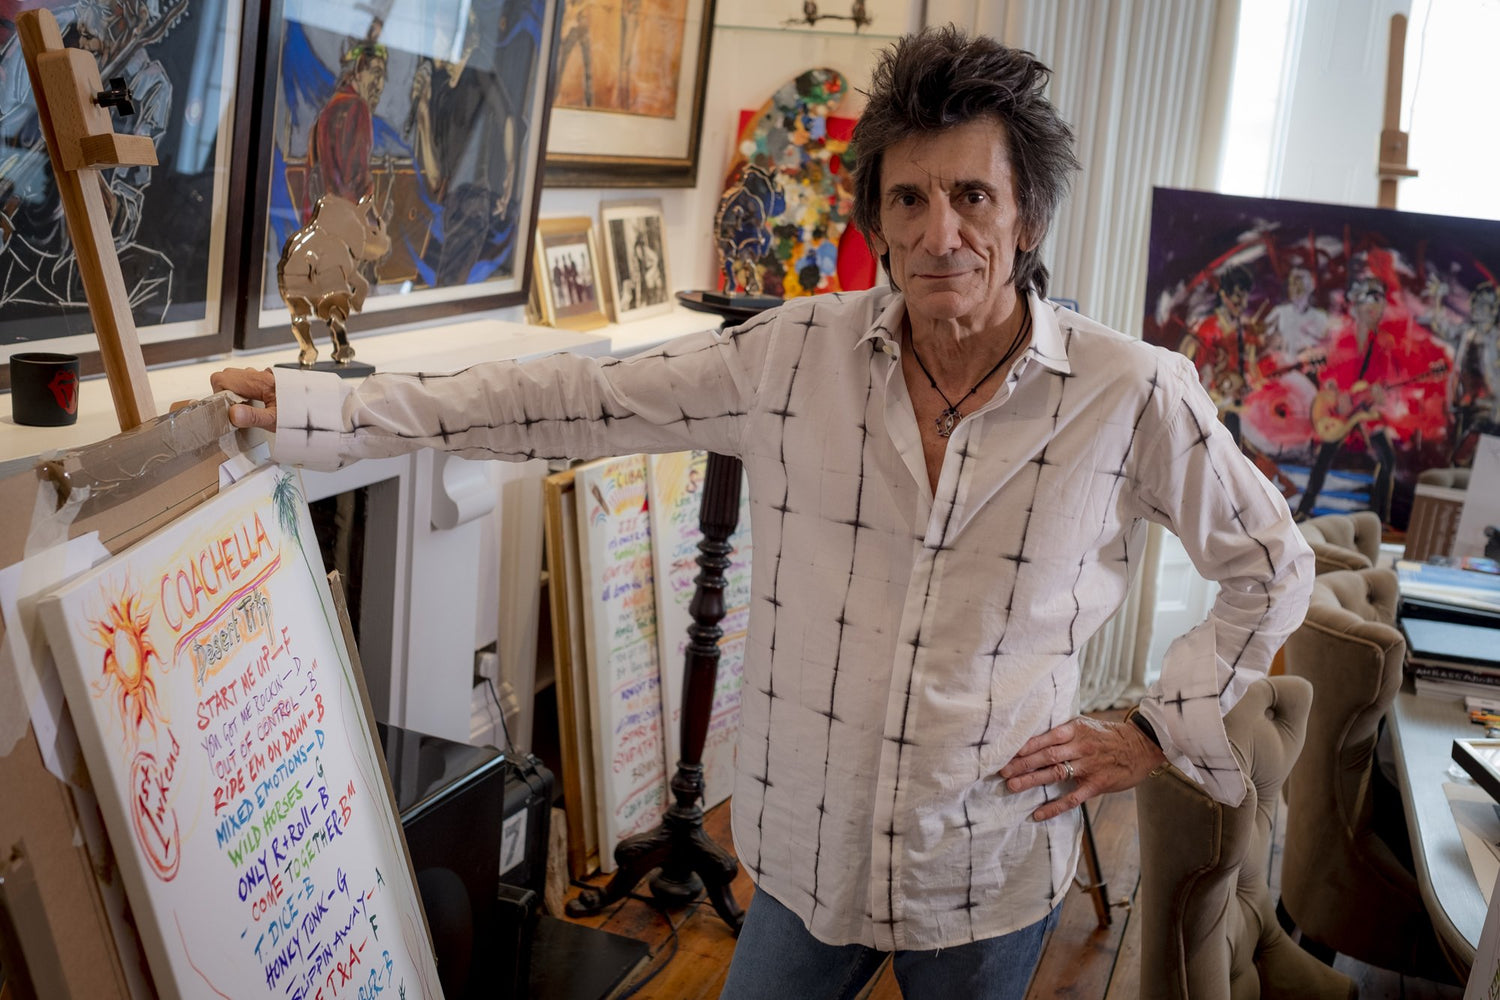 Ronnie Wood Artist Biography and Art Gallery Collection